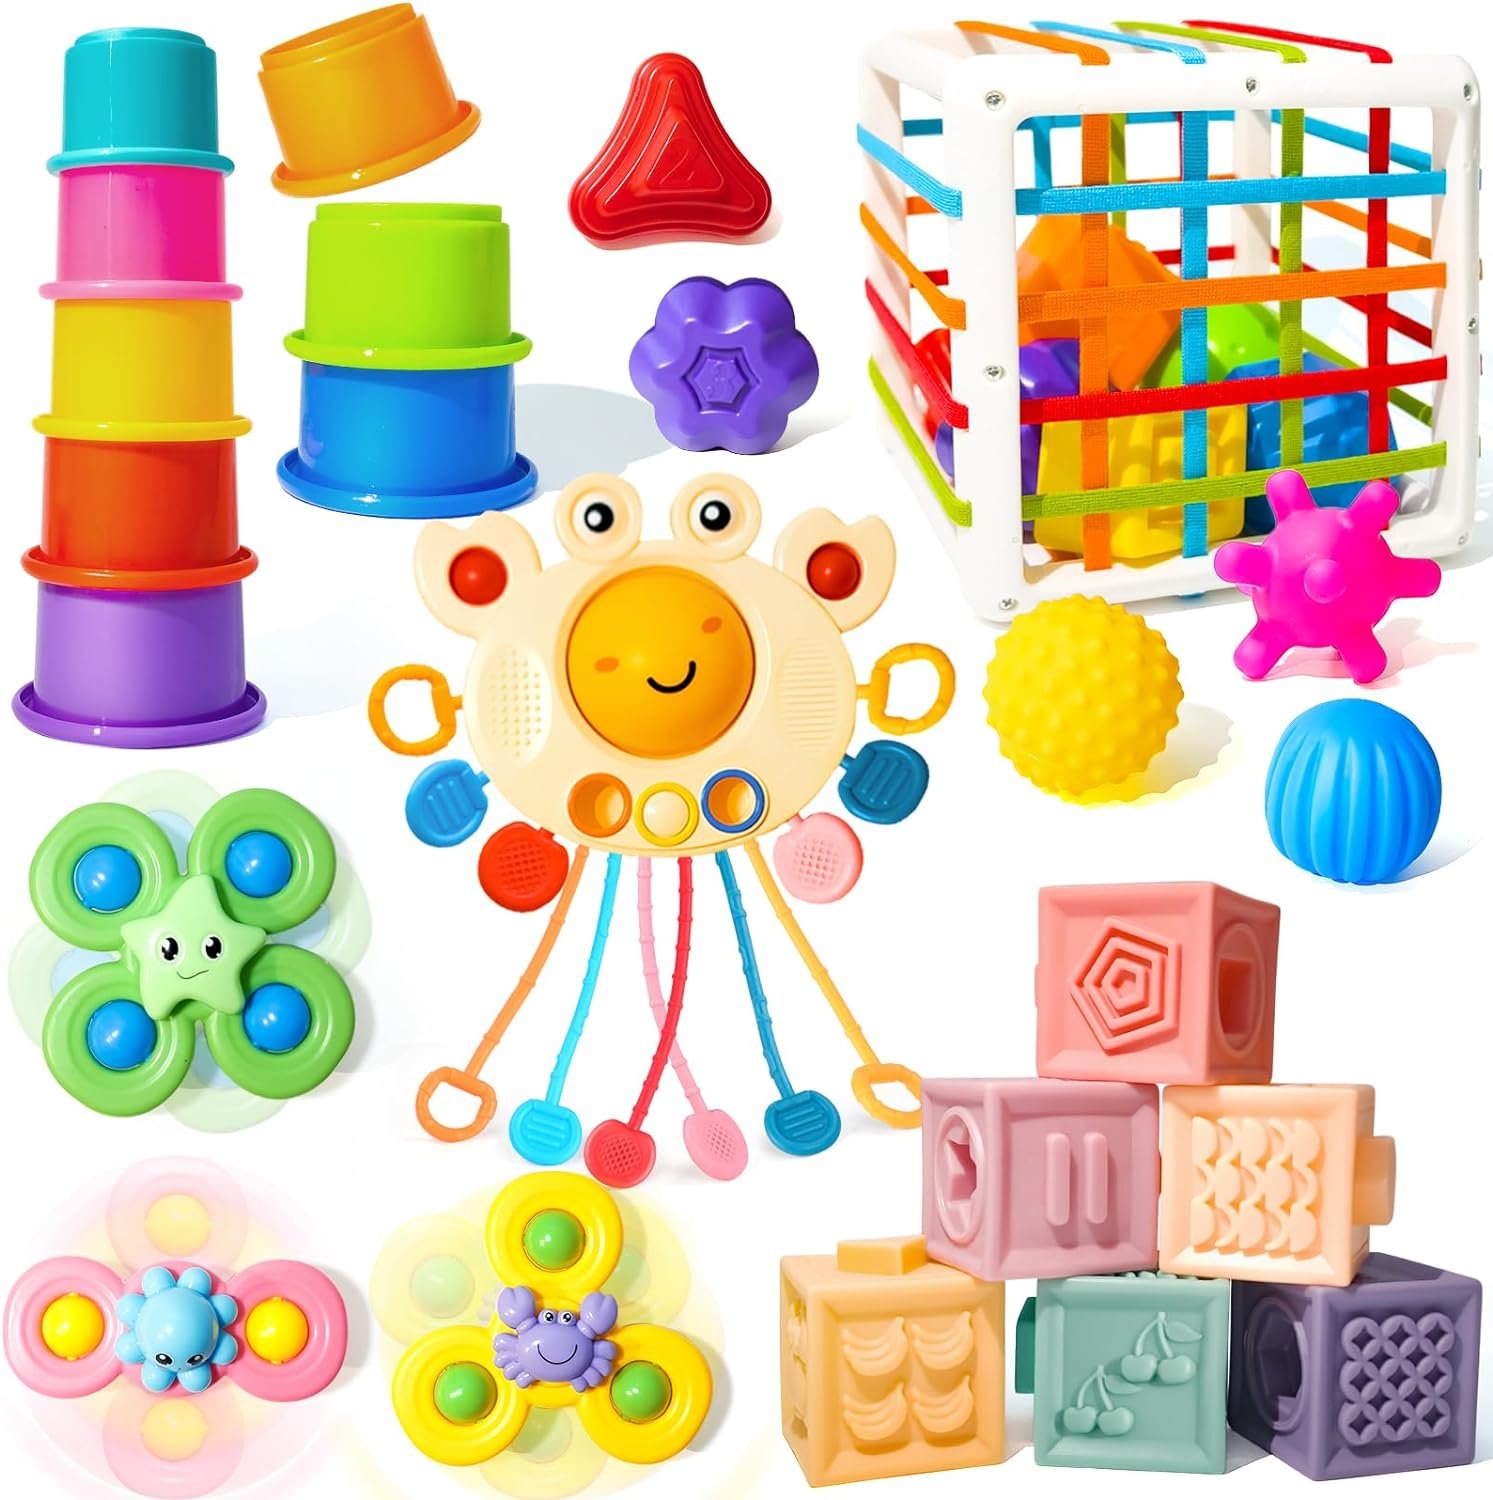 Montessori Toys for Babies 0-3-6-12 Months, 6 in 1 Baby Toys 4 5 6 7 8 9 Month Old, Baby Blocks Stacking Toys, Infant Baby Sensory Development Learning Toys Gifts for 1 2 3 Year Old Boys Girls